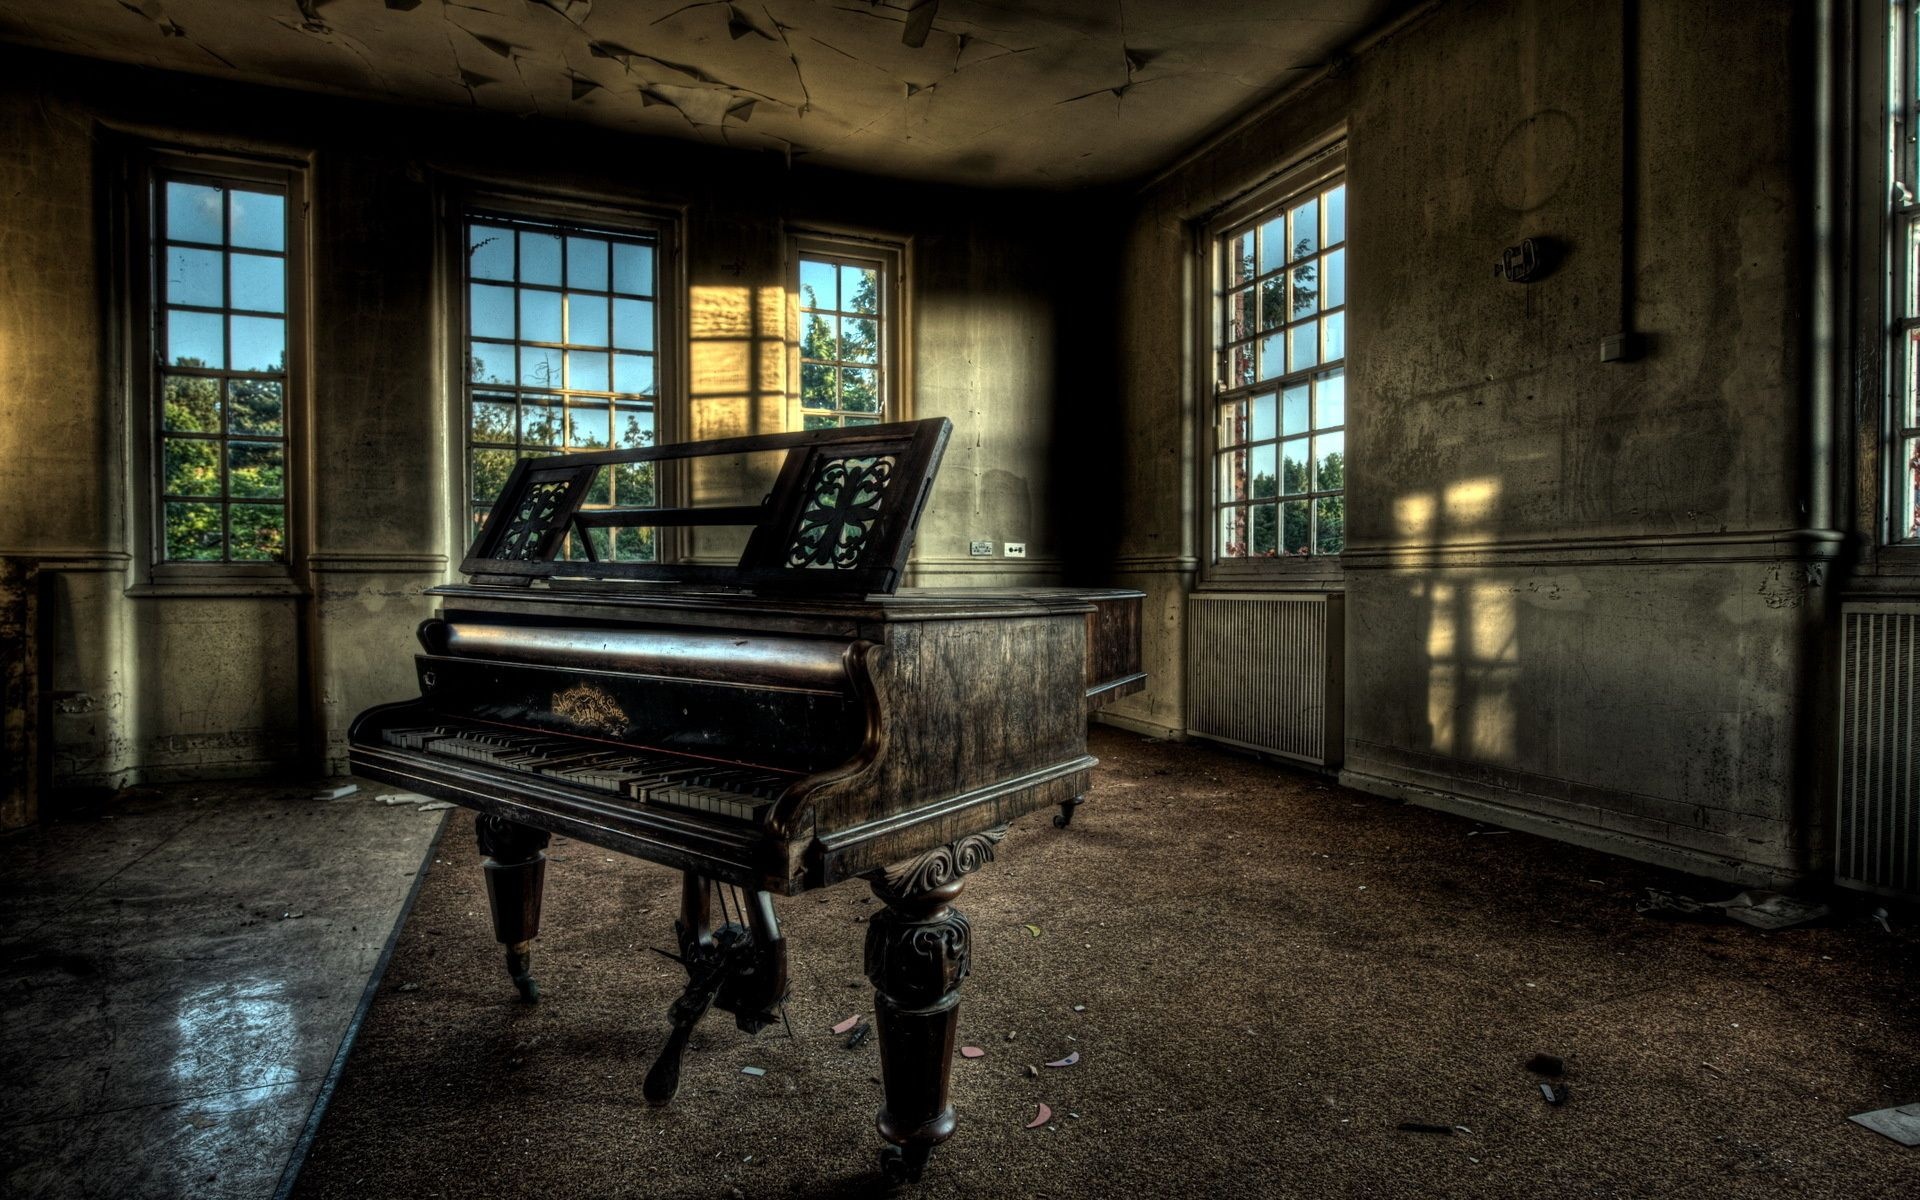 Grand Piano: Abandoned house, A musical stringed instrument resembling a harp set in a horizontal frame. 1920x1200 HD Wallpaper.